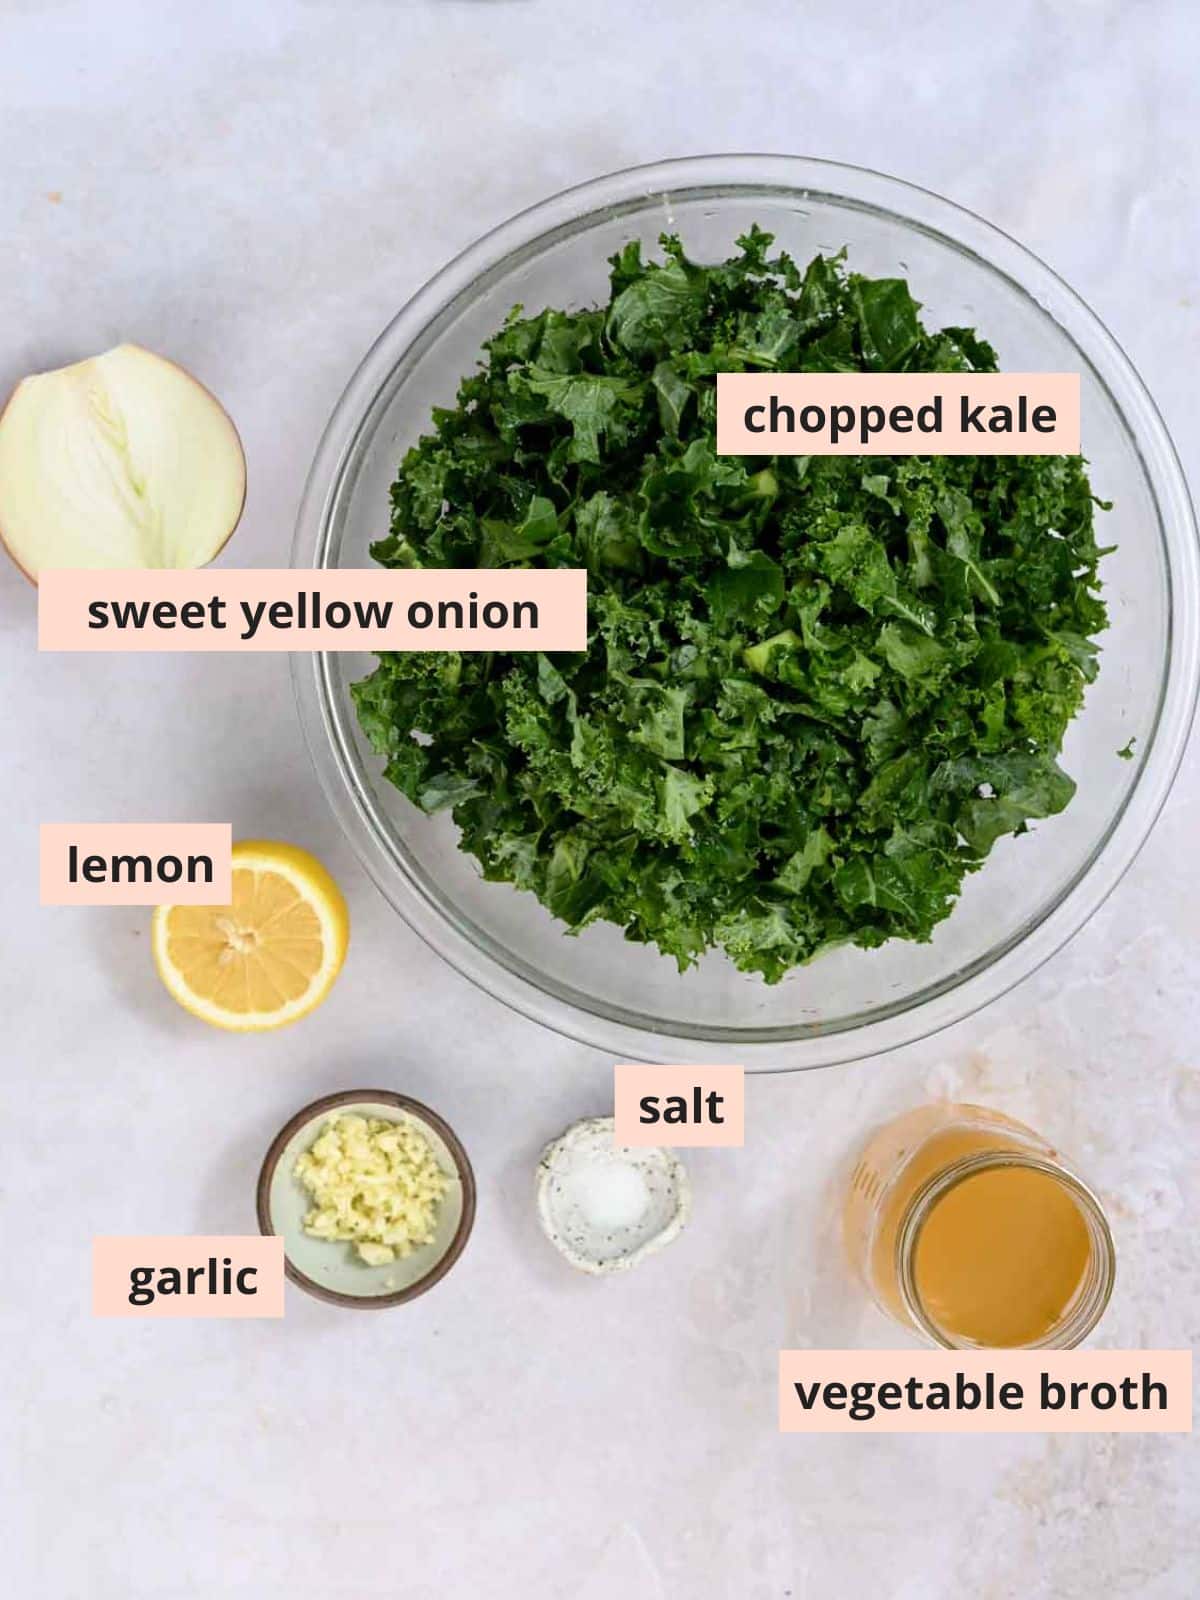 Labeled ingredients used to make instant pot kale.